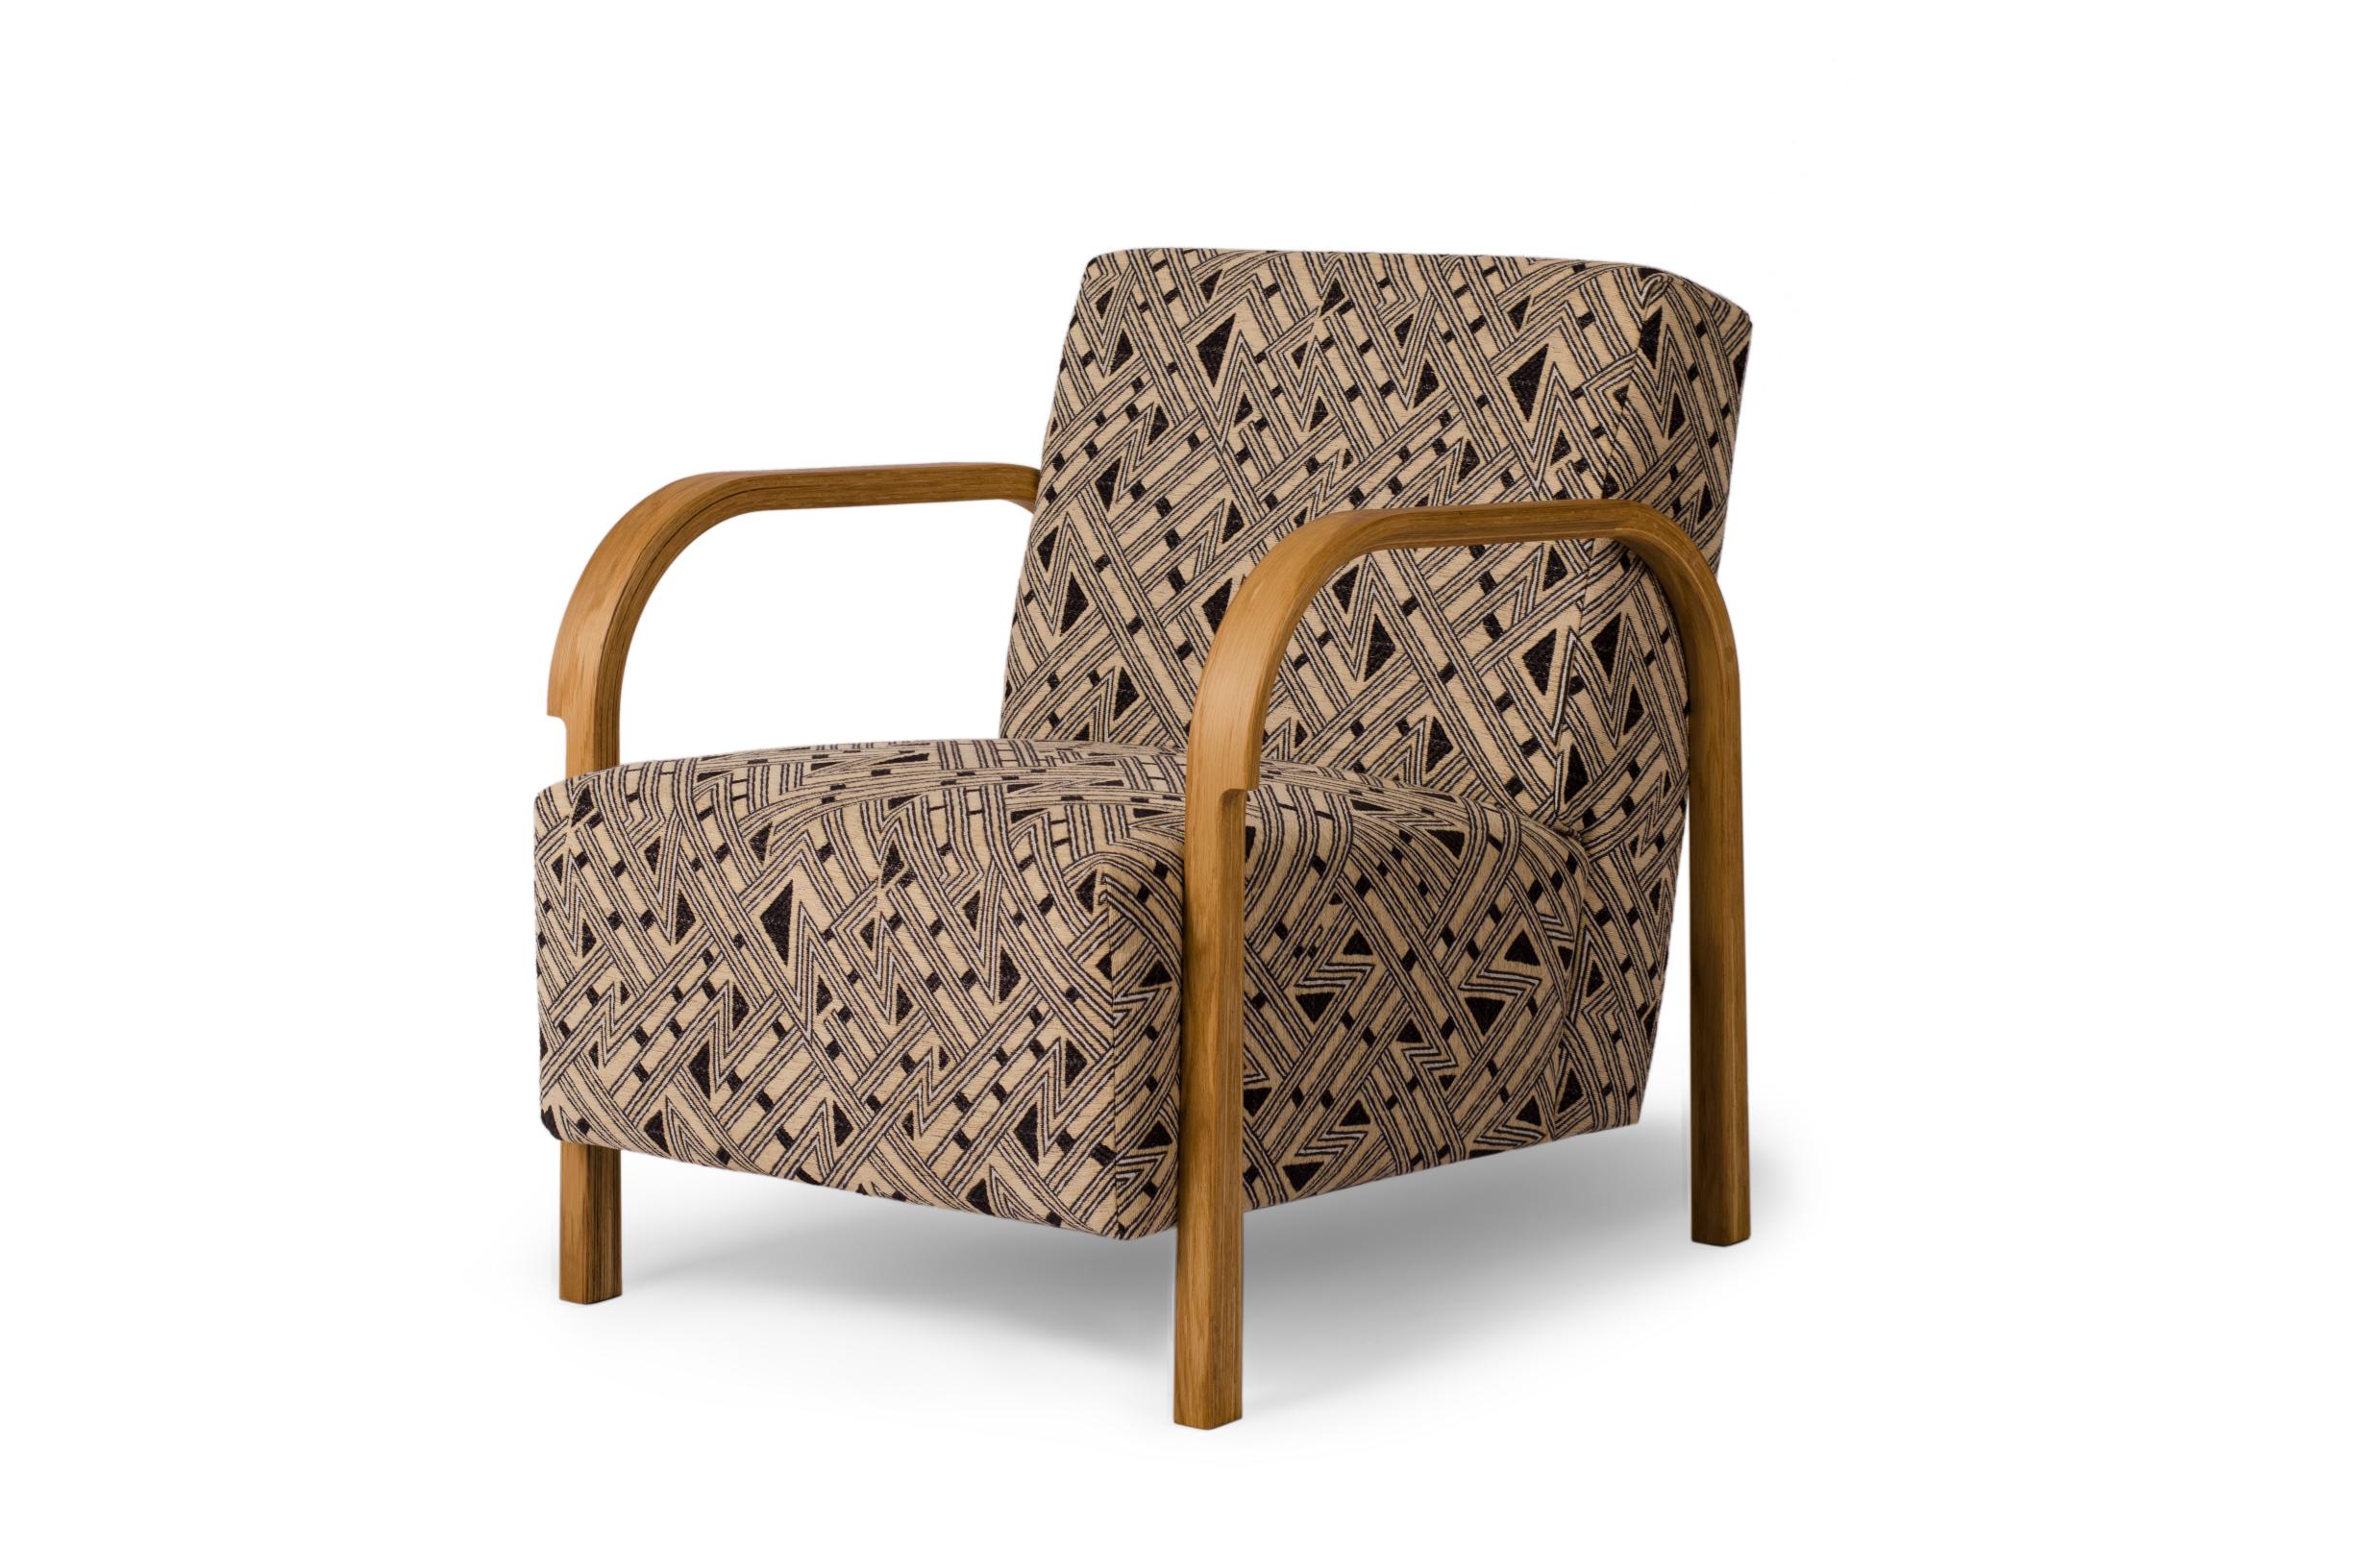 JENNIFER SHORTO / Kongaline & Seafoam ARCH Lounge Chairs by Mazo Design
Dimensions: W 69 x D 79 x H 76 cm
Materials: Oak, Textile

With the new ARCH collection, mazo forges new paths with their forward-looking modernism. The series is a tribute